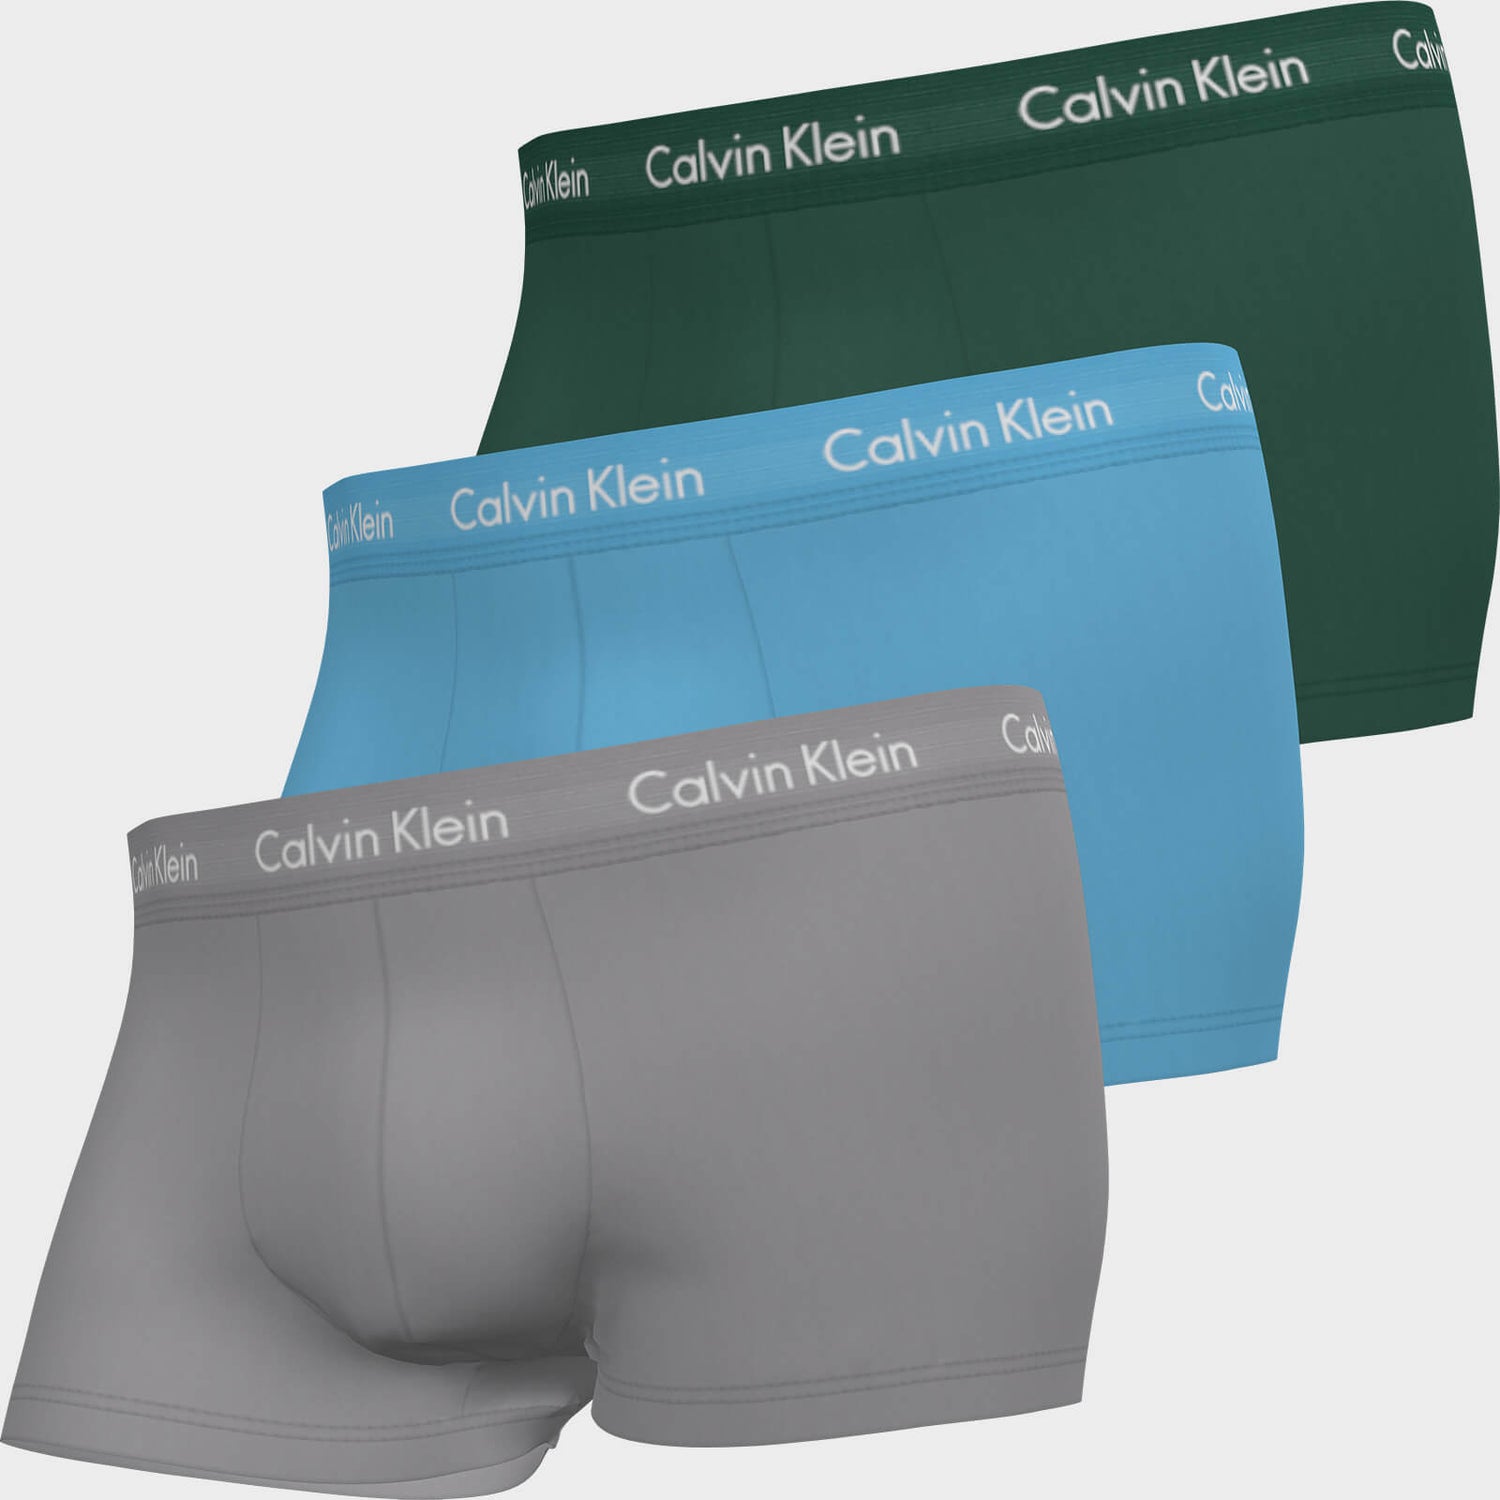 Calvin Klein Men's Cotton Stretch Low Rise 3 Pack Trunks with Contrast Waistband - Jade Sea/Sky High/Sleek Silver